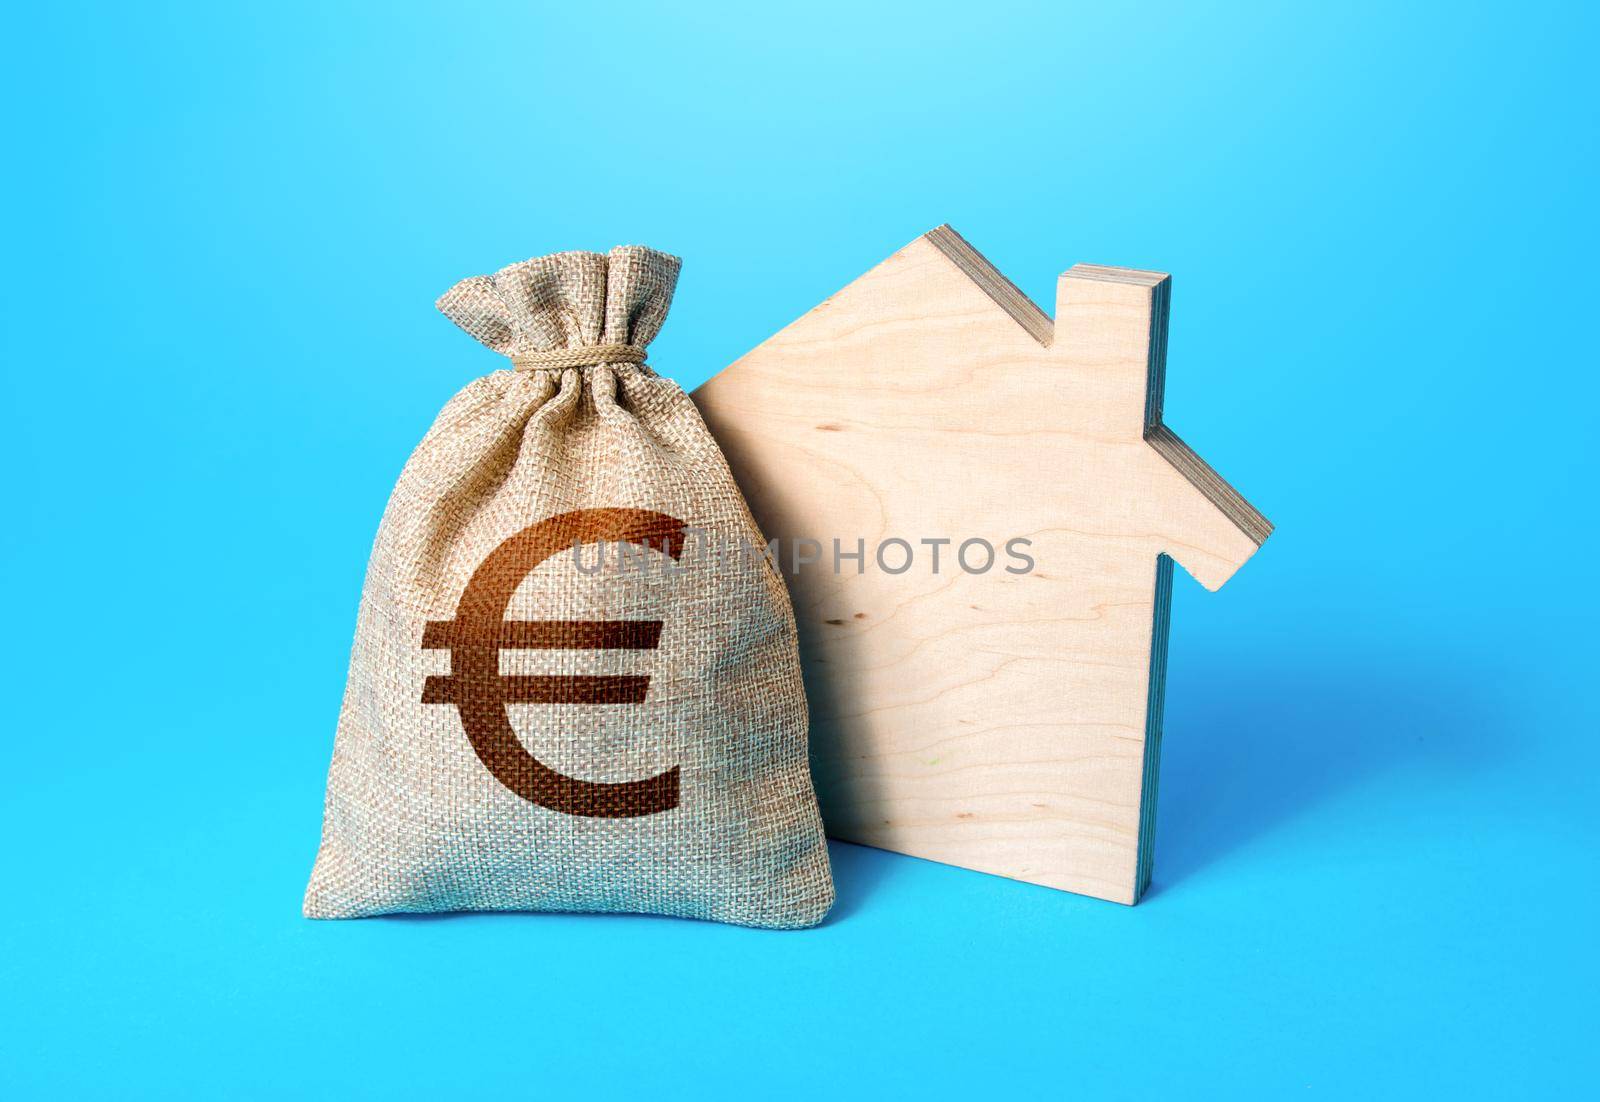 House silhouette and a euro money bag. Home purchase, investment in real estate construction. Mortgage loan. Property appraisal. Realtor services. House project development. Rental business by iLixe48